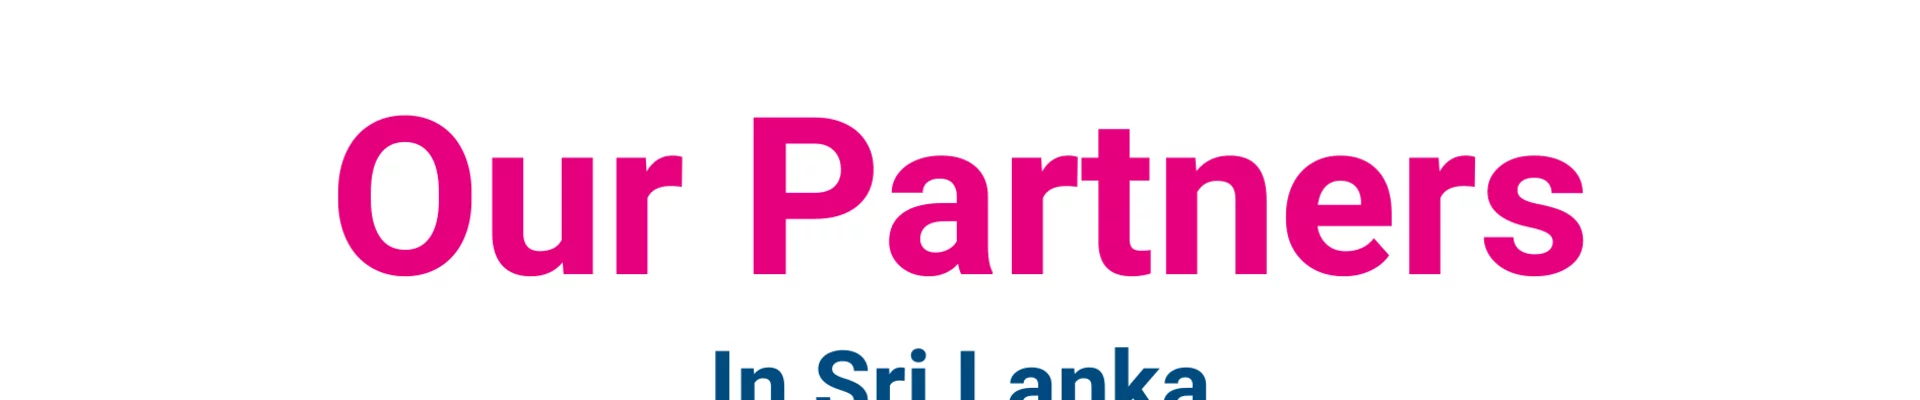 Our Partners in Sri Lanka